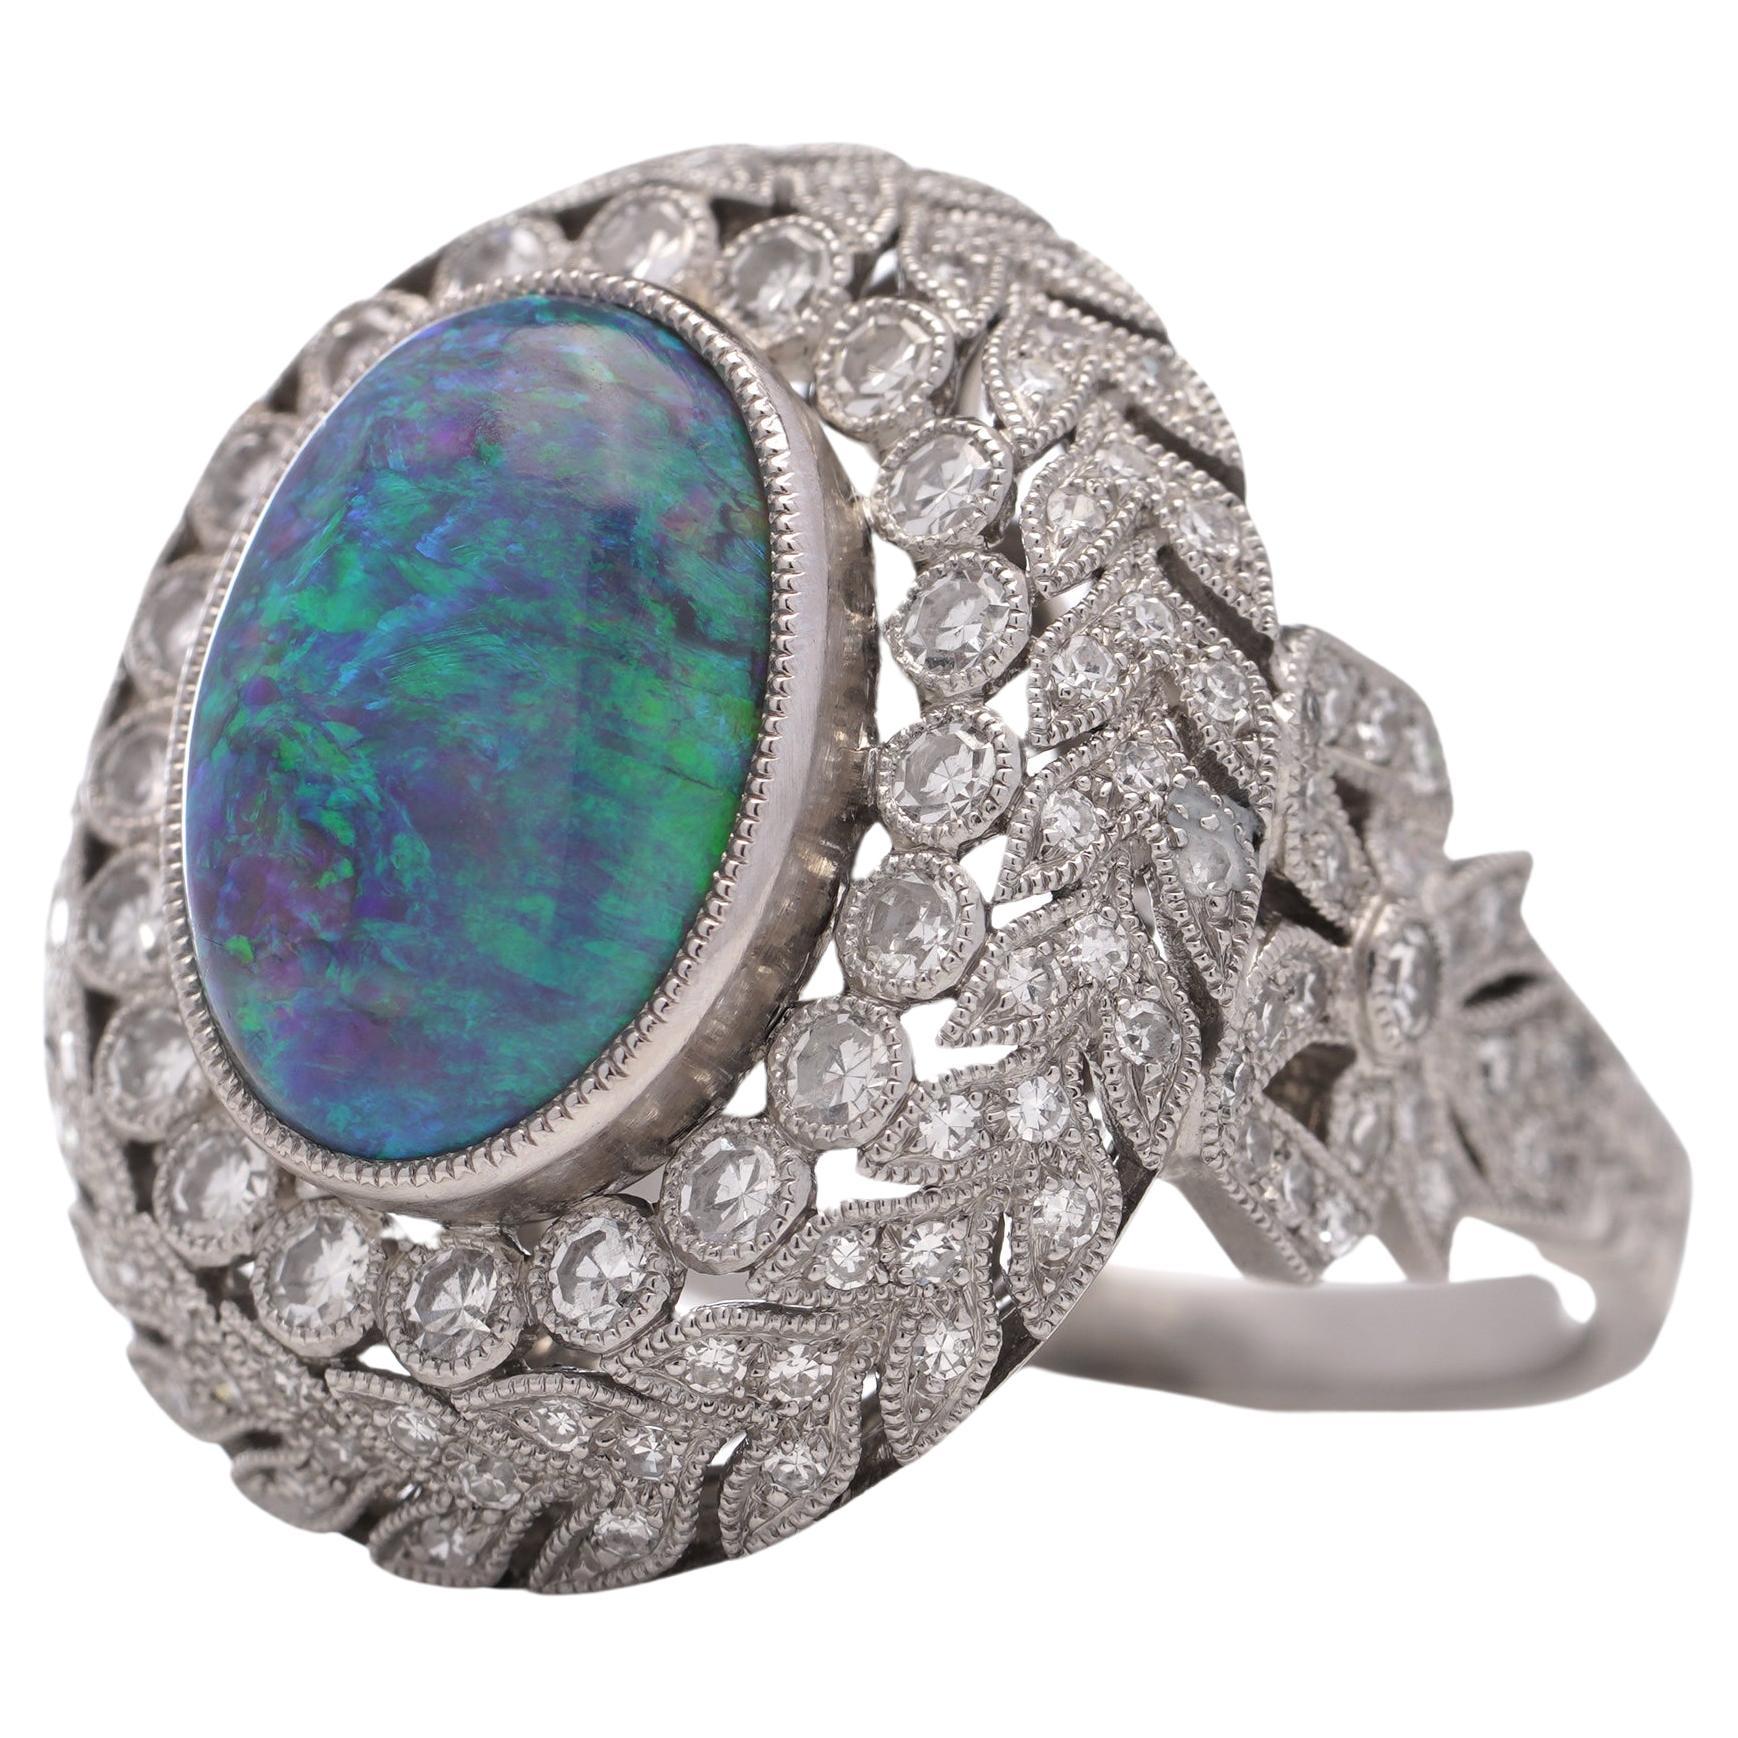 JoAq 850 Platinum 3.30 carats of Oval Opal cluster ring  In Good Condition For Sale In Braintree, GB